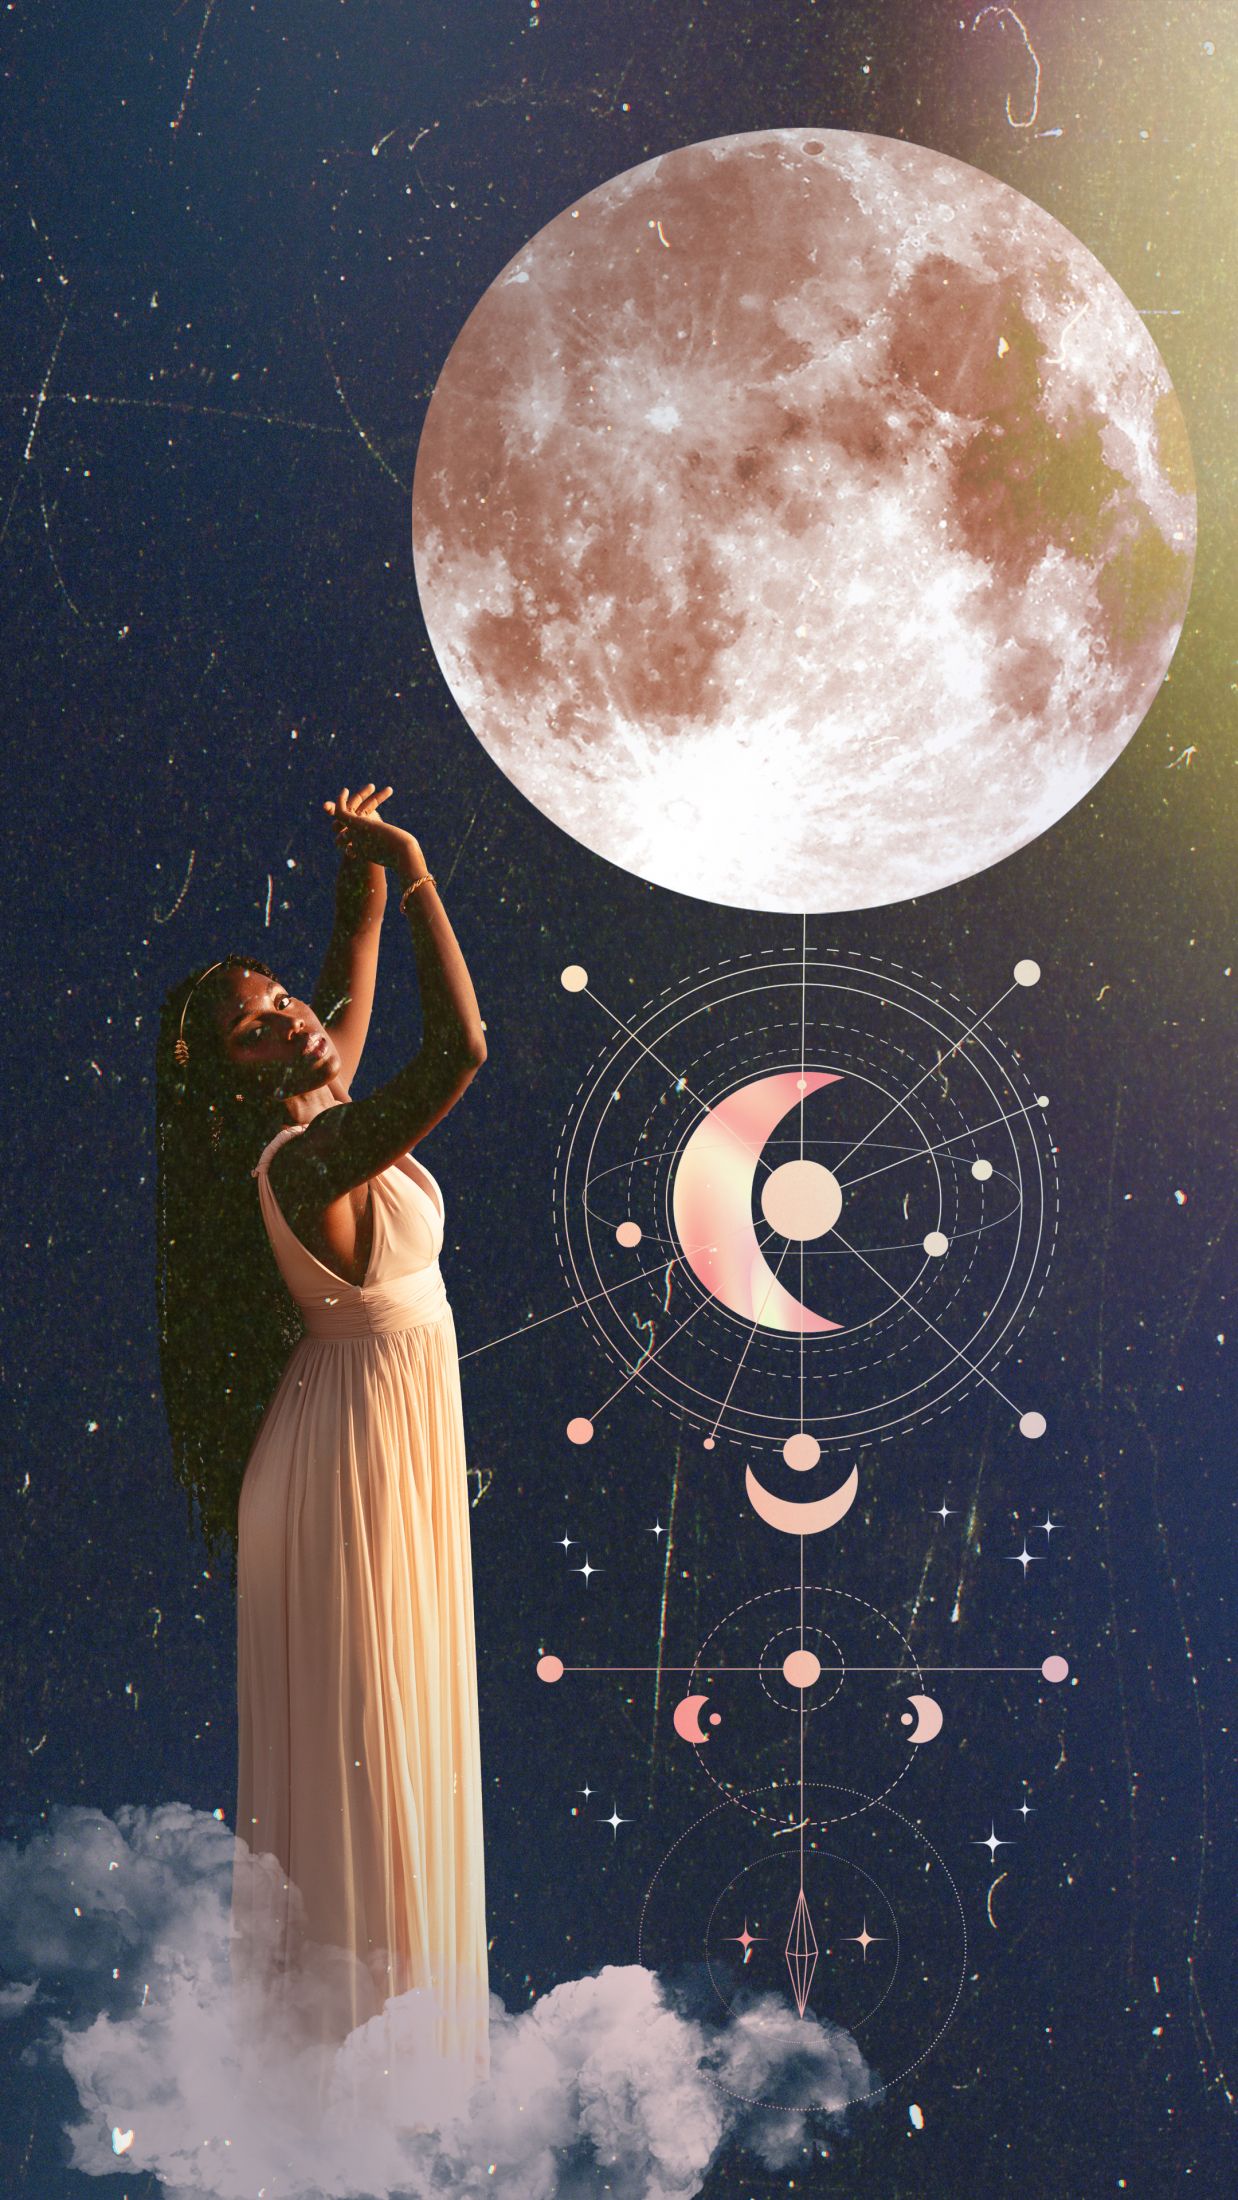 horoscope-and-astrology-collage (1).jpg